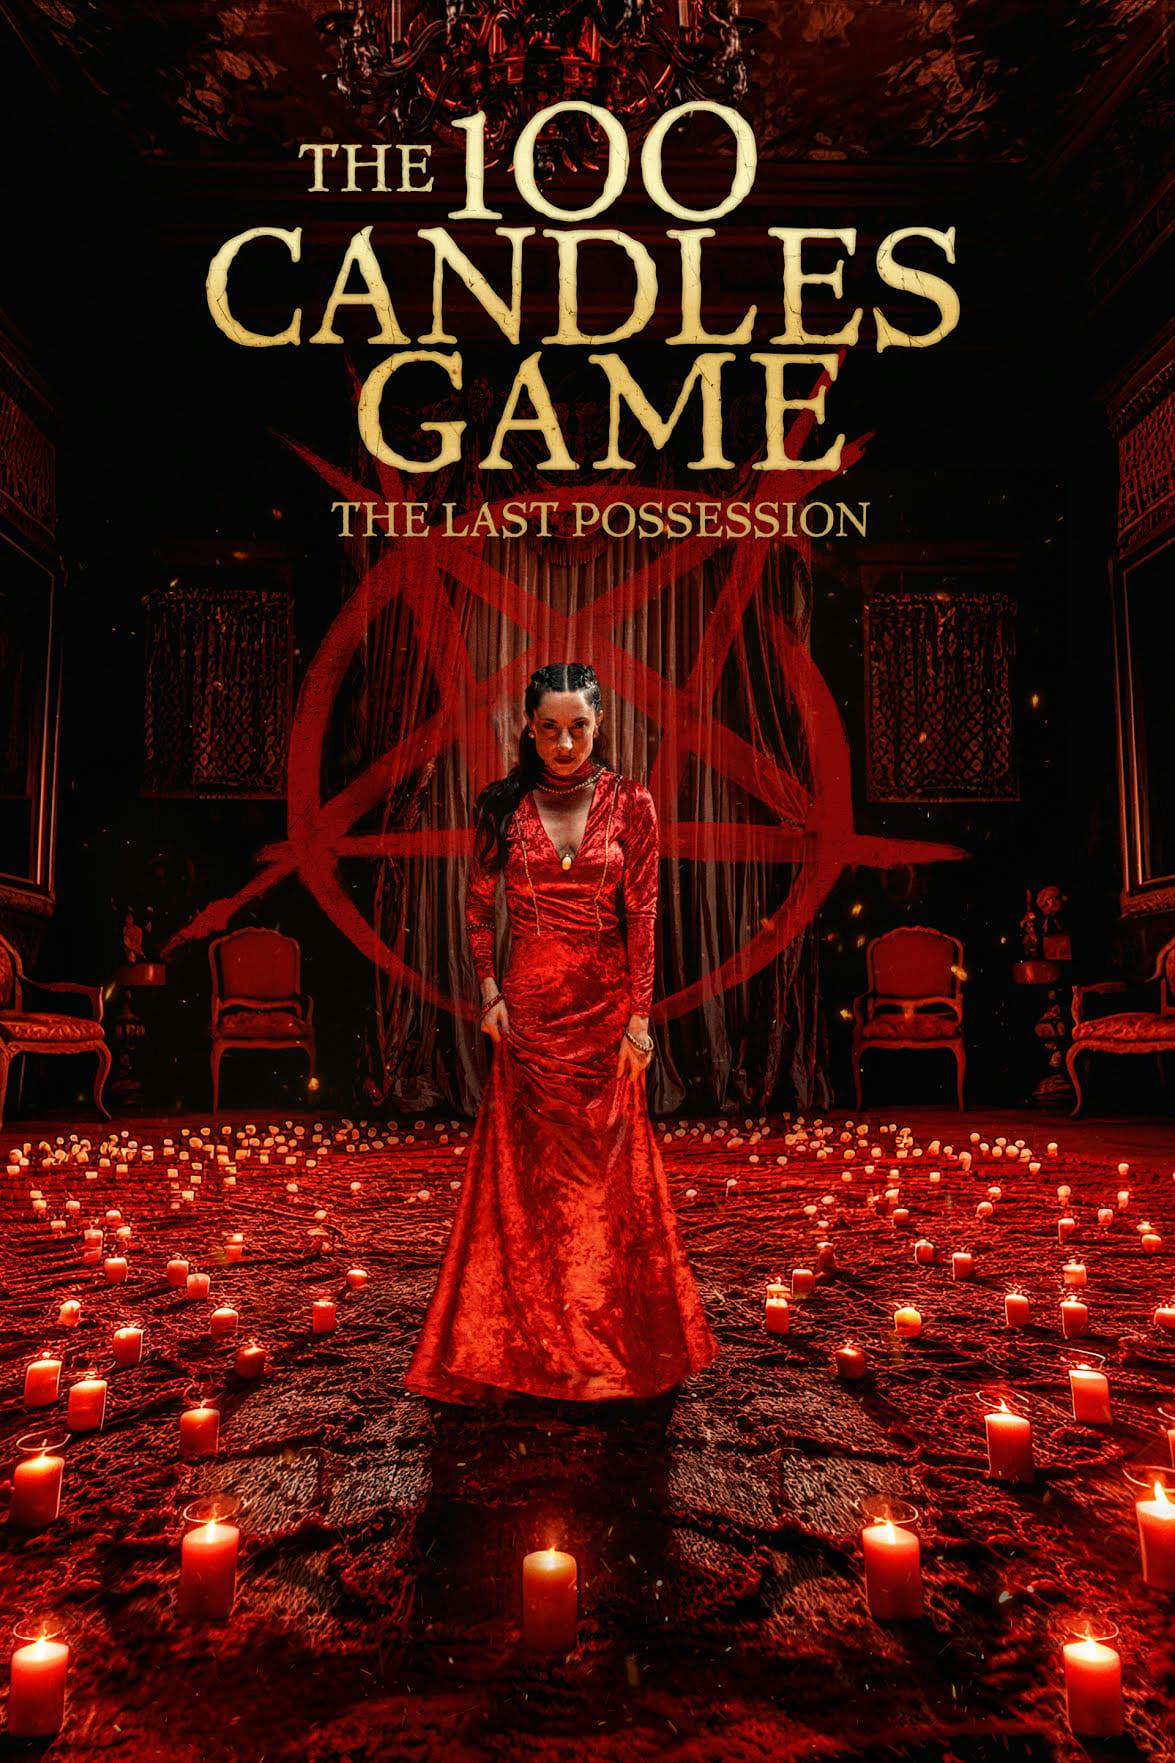 Movie poster of "The 100 Candles Game: The Last Possession"